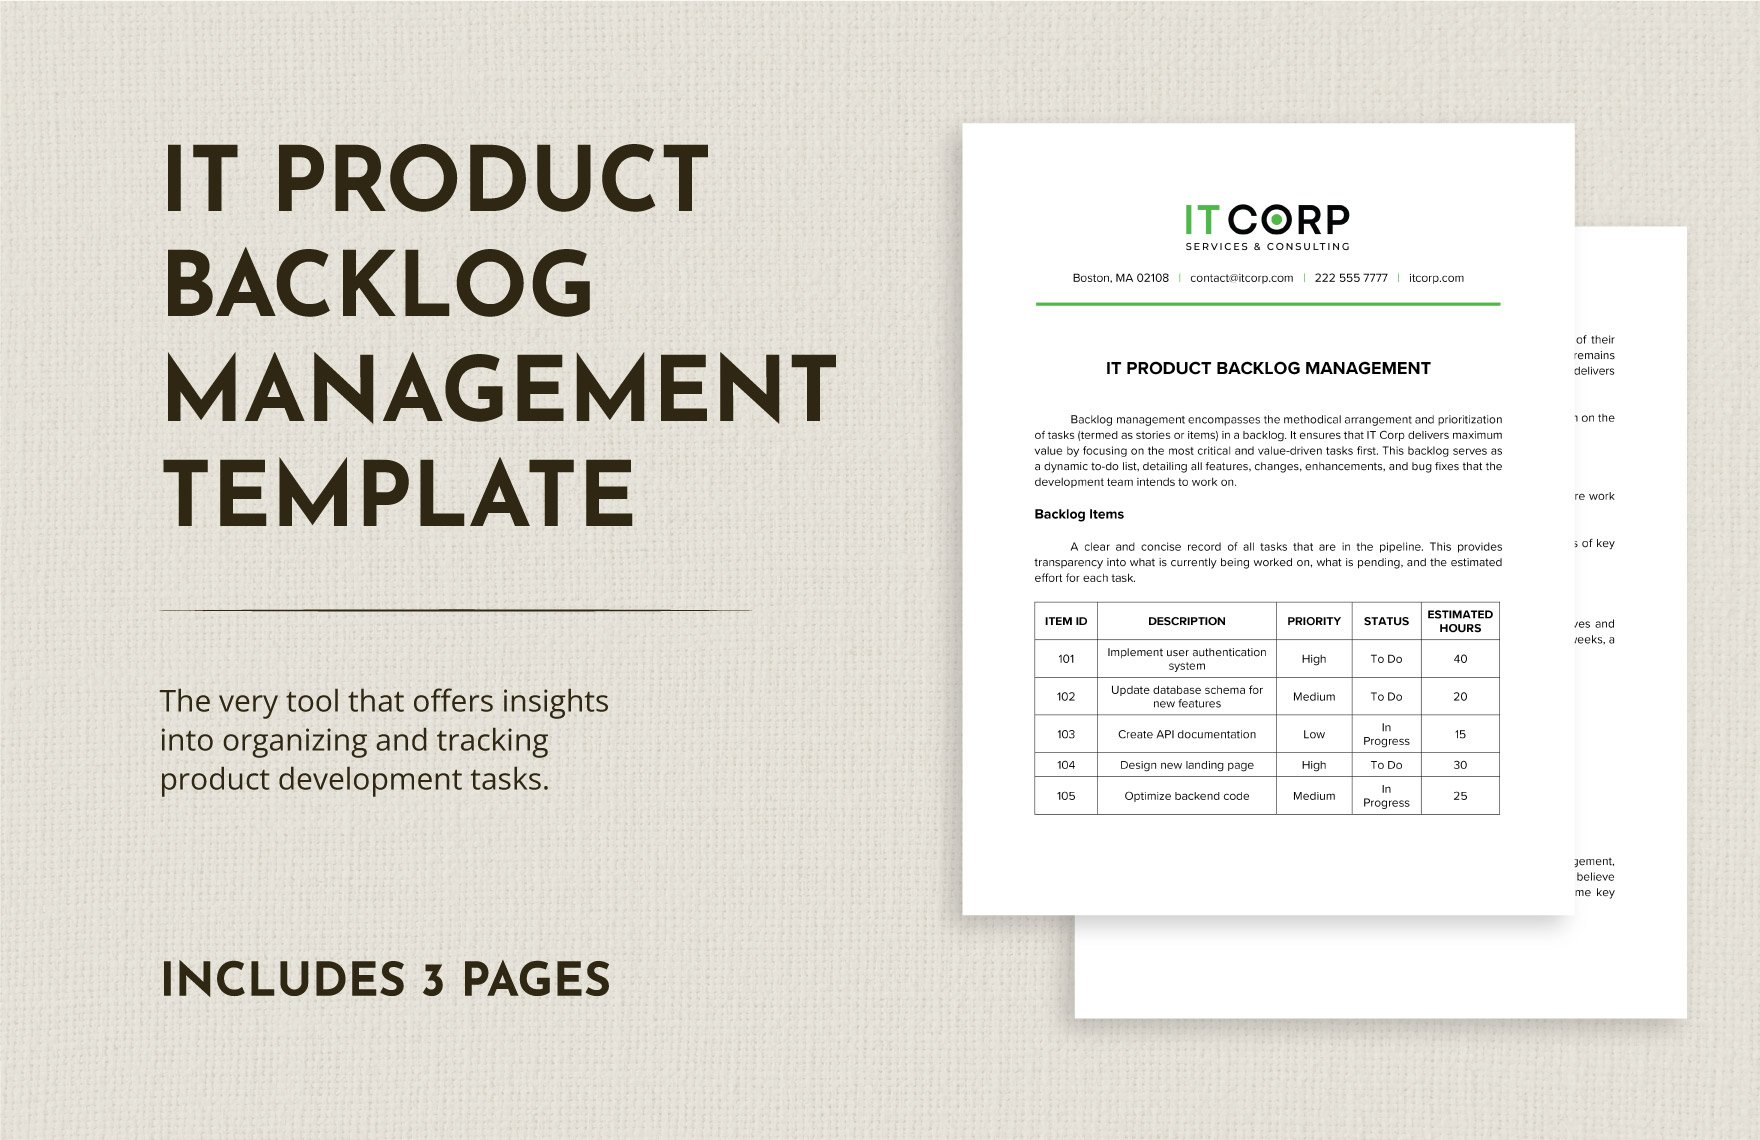 IT Product Backlog Management Template